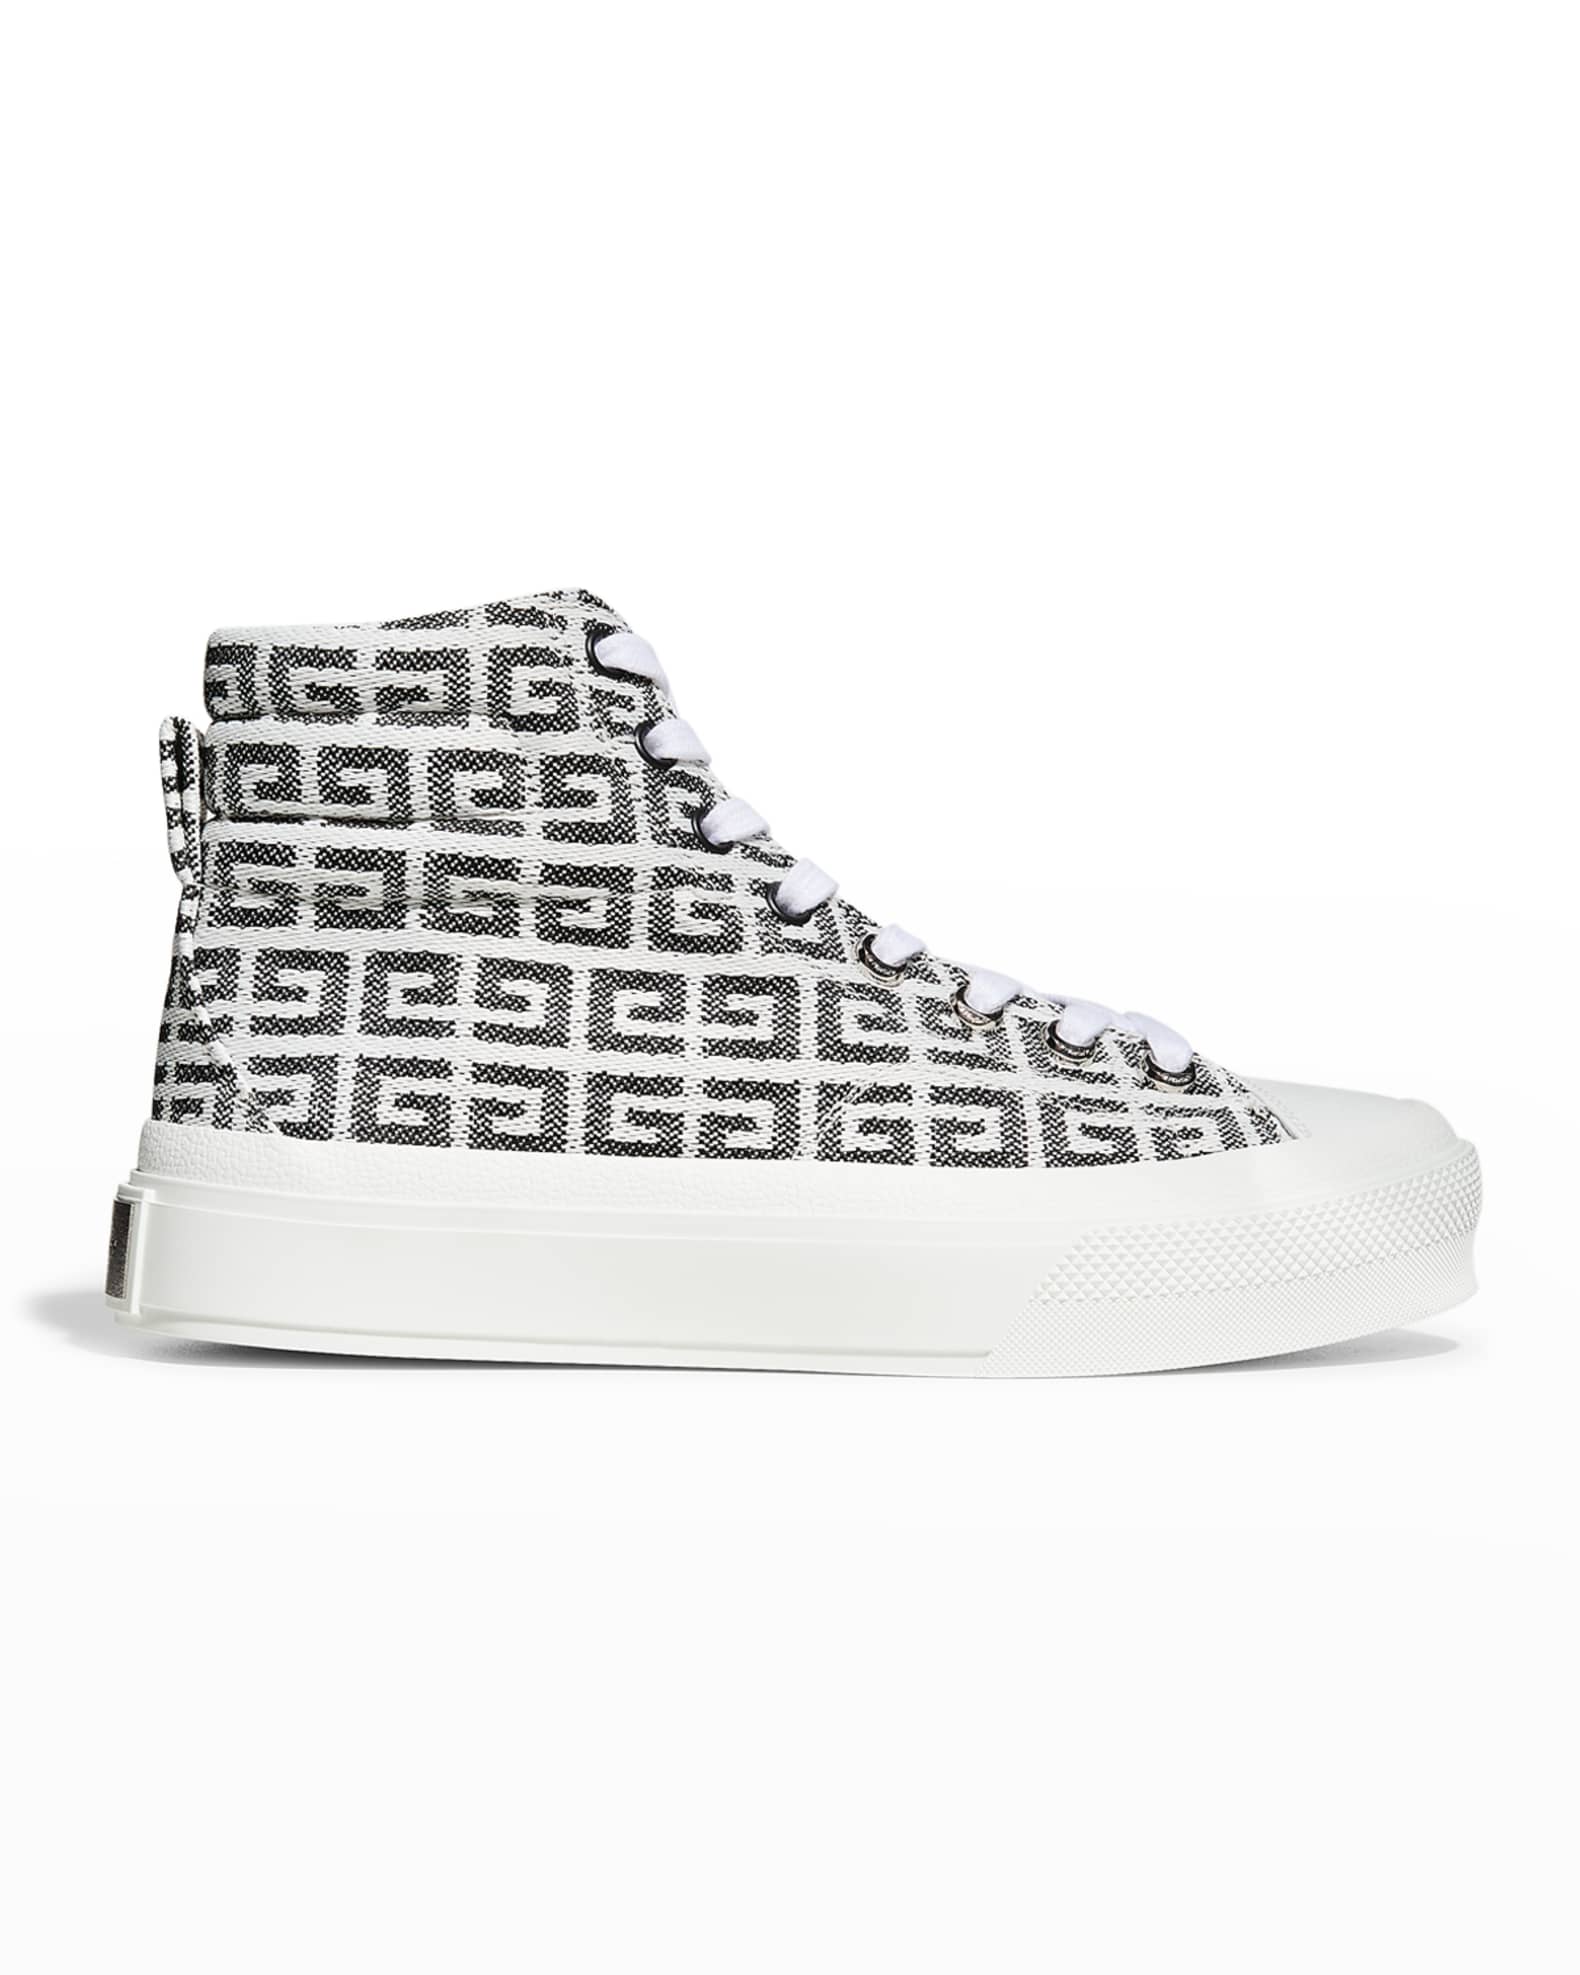 Givenchy City 4G Jacquard High-Top Sneakers | Neiman Marcus